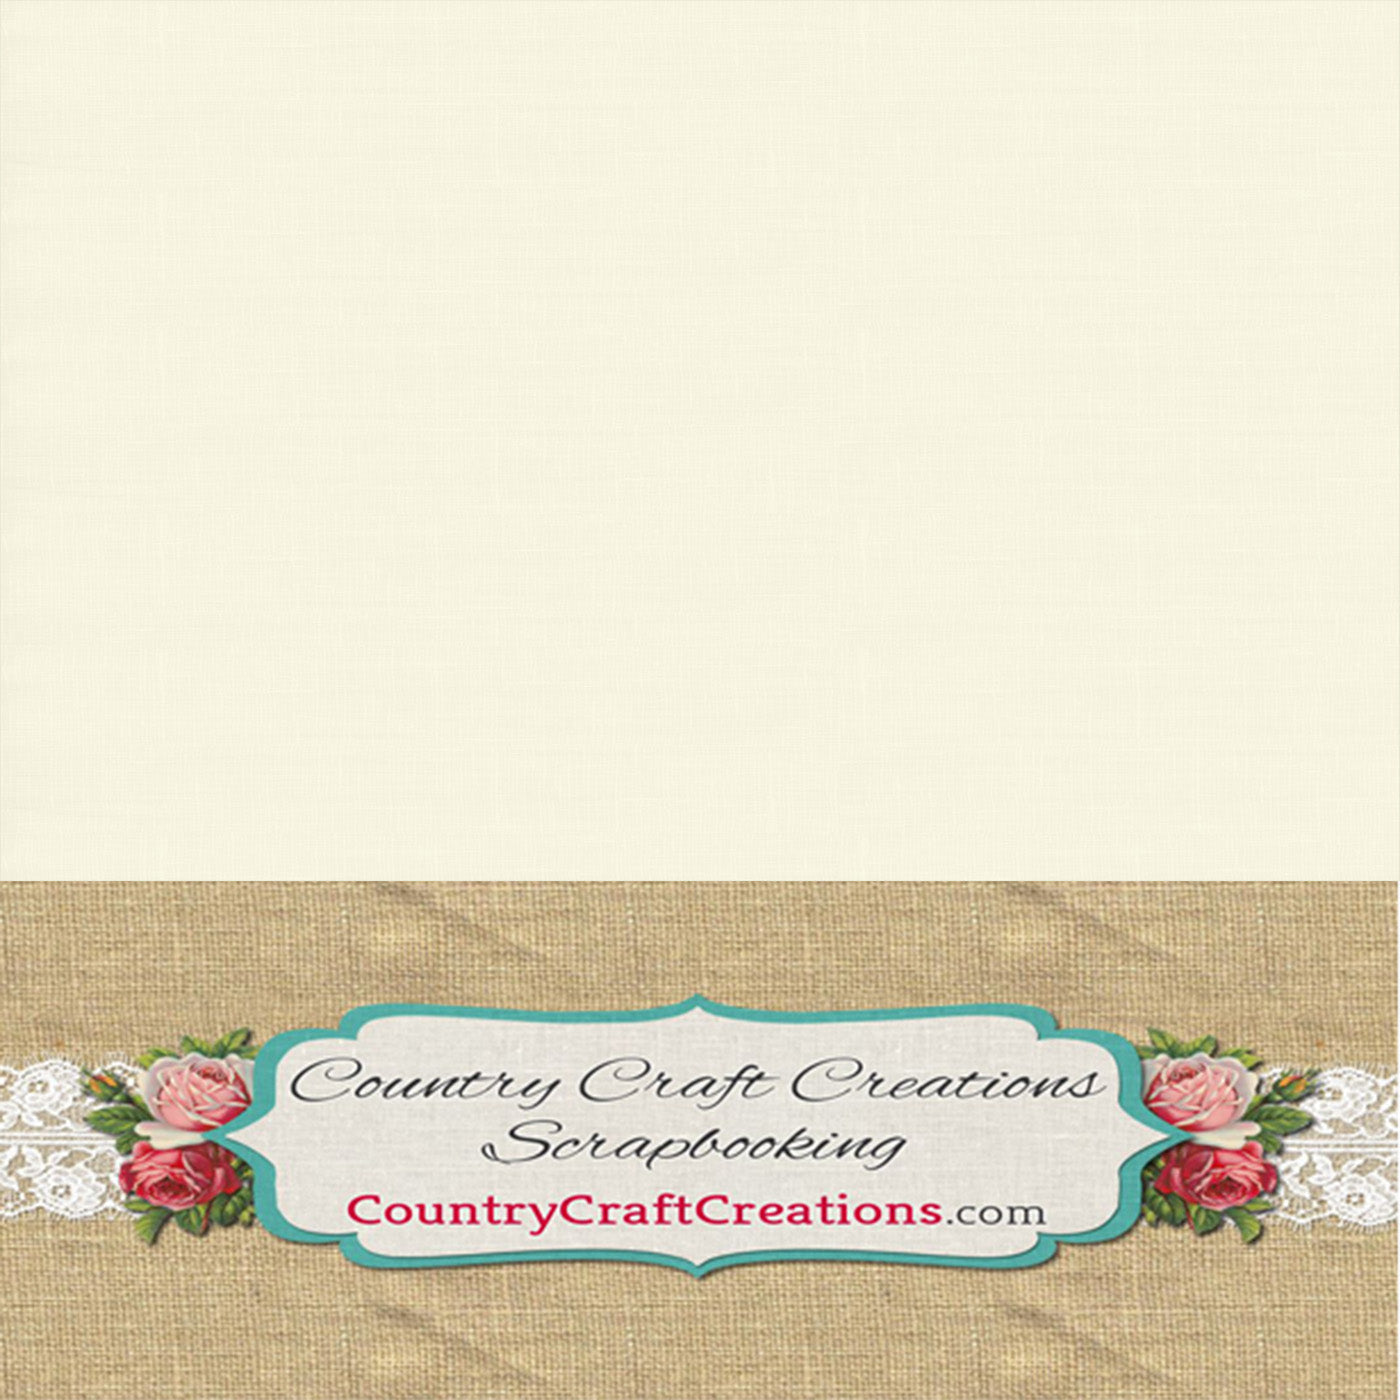 Country Craft Creations - Mirrored Cardstock - Silver / 8 1/2 x 11